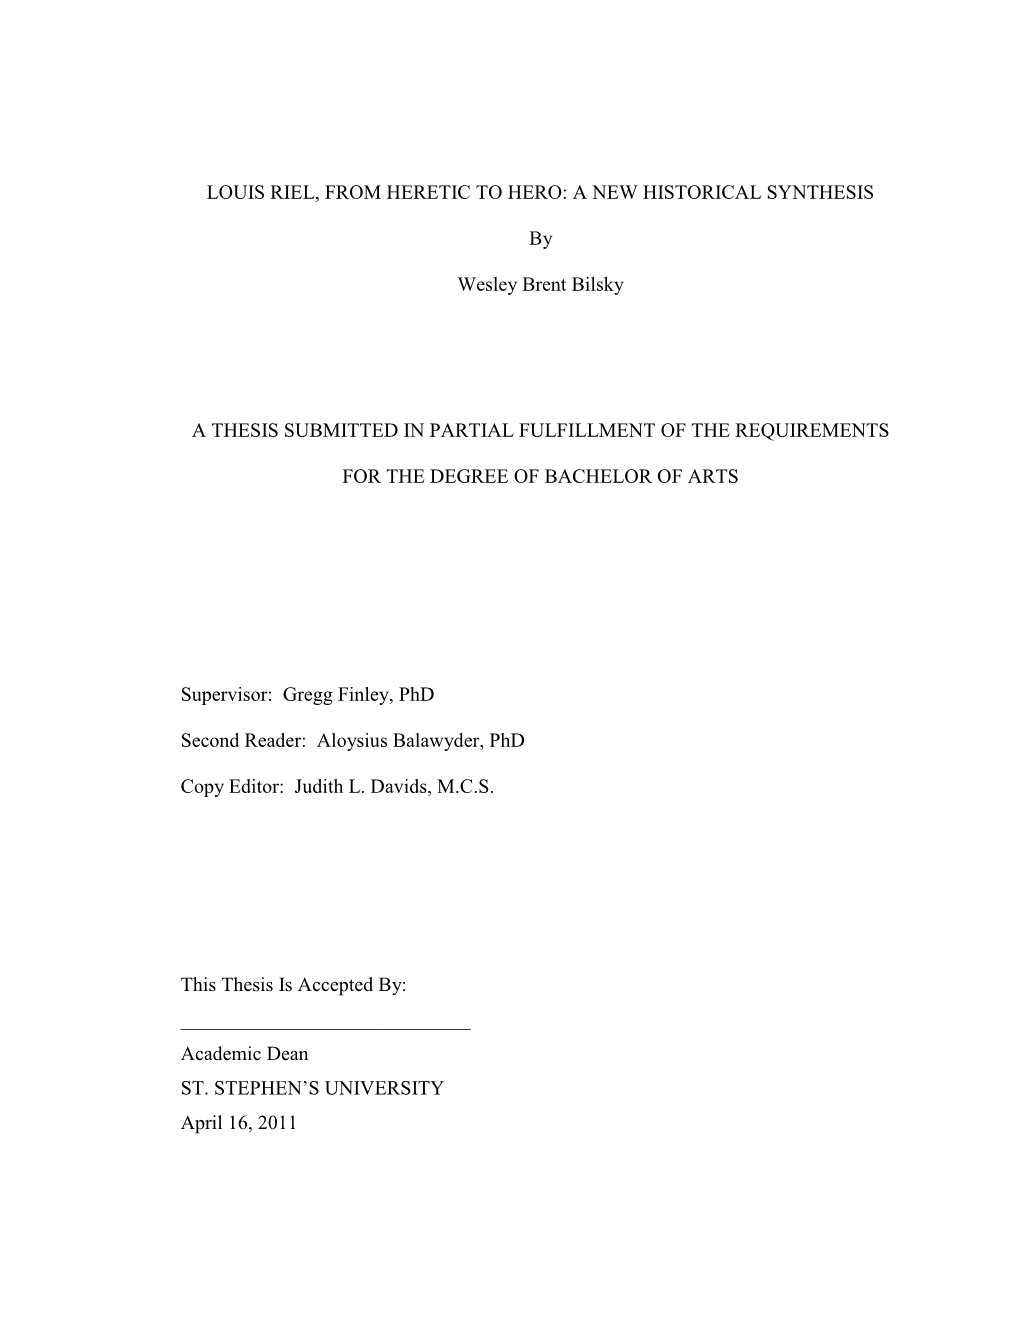 LOUIS RIEL, from HERETIC to HERO: a NEW HISTORICAL SYNTHESIS by Wesley Brent Bilsky a THESIS SUBMITTED in PARTIAL FULFILLMENT O